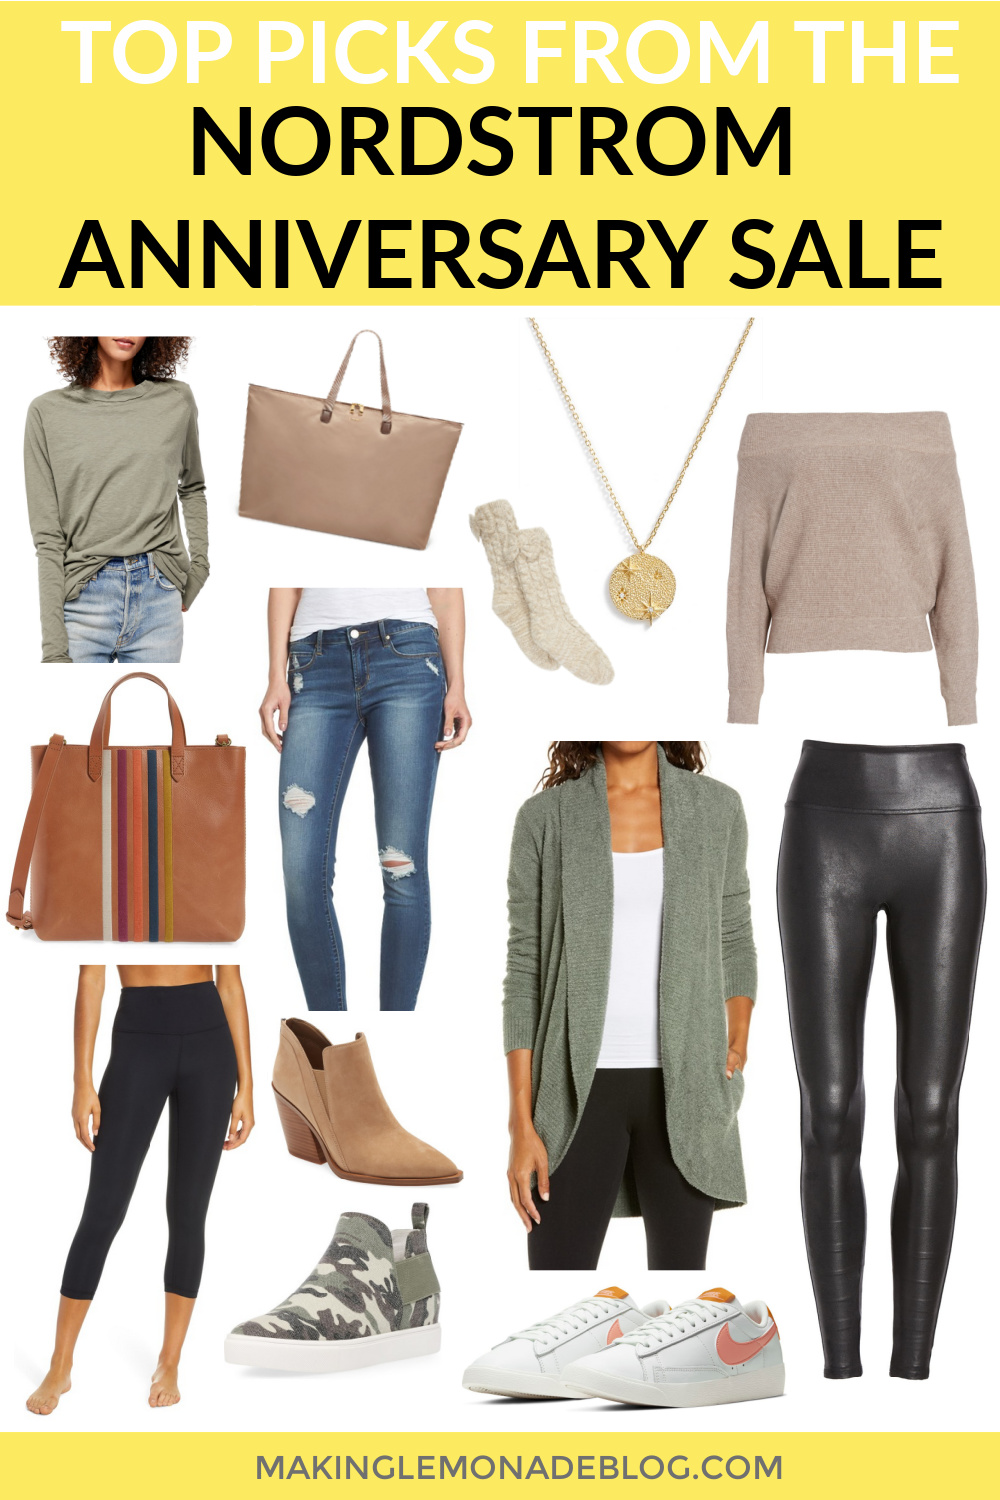 My Athleisure Outfit from the Nordstrom Anniversary Sale - Fashion